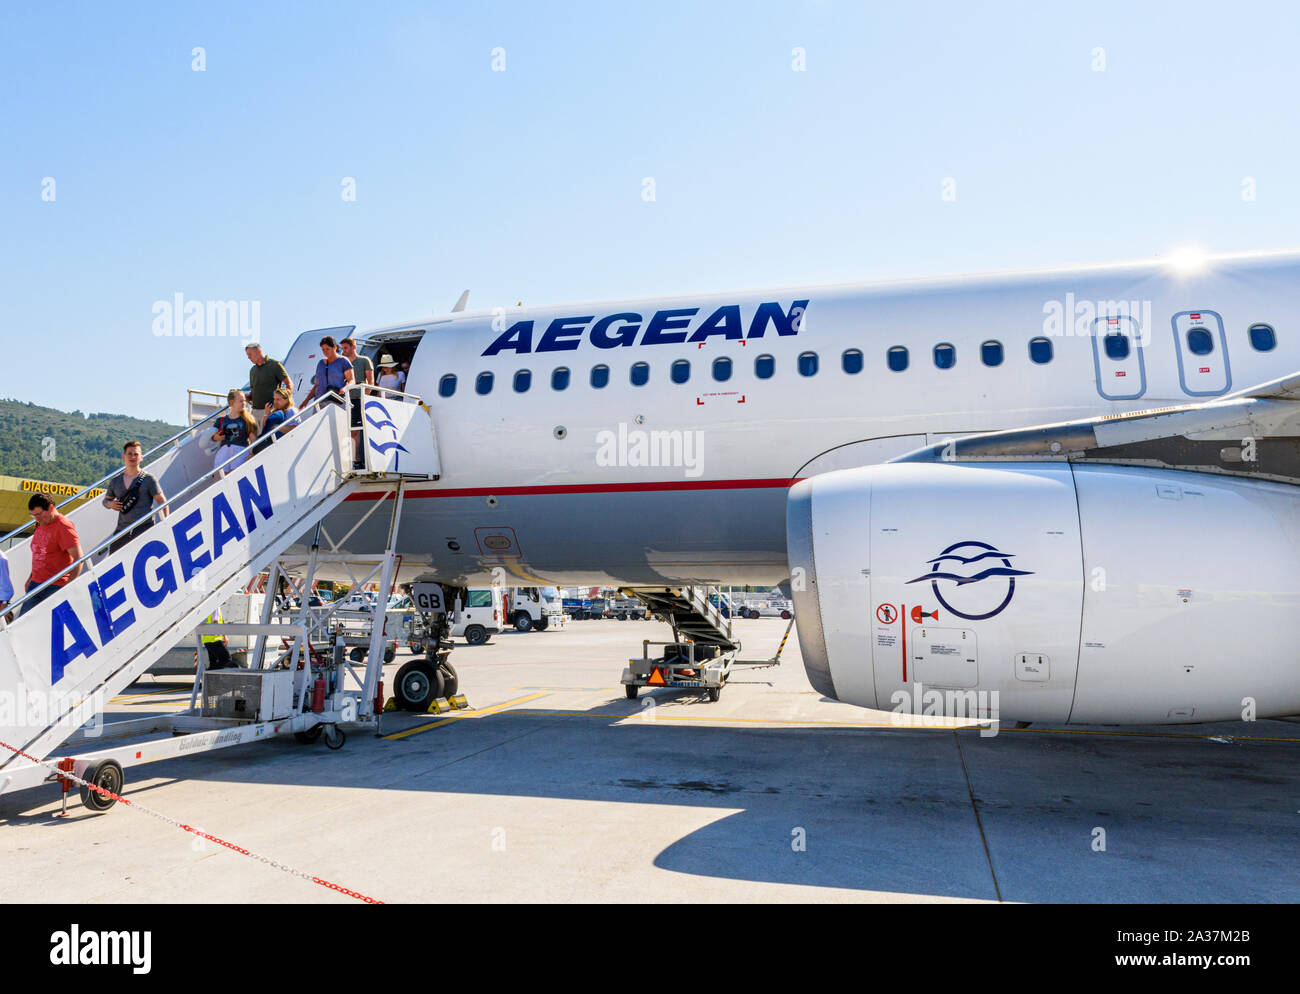 Passengers exiting an Aegean Airlines plane at Diagoras airport, Rhodes Island, Greece Stock Photo